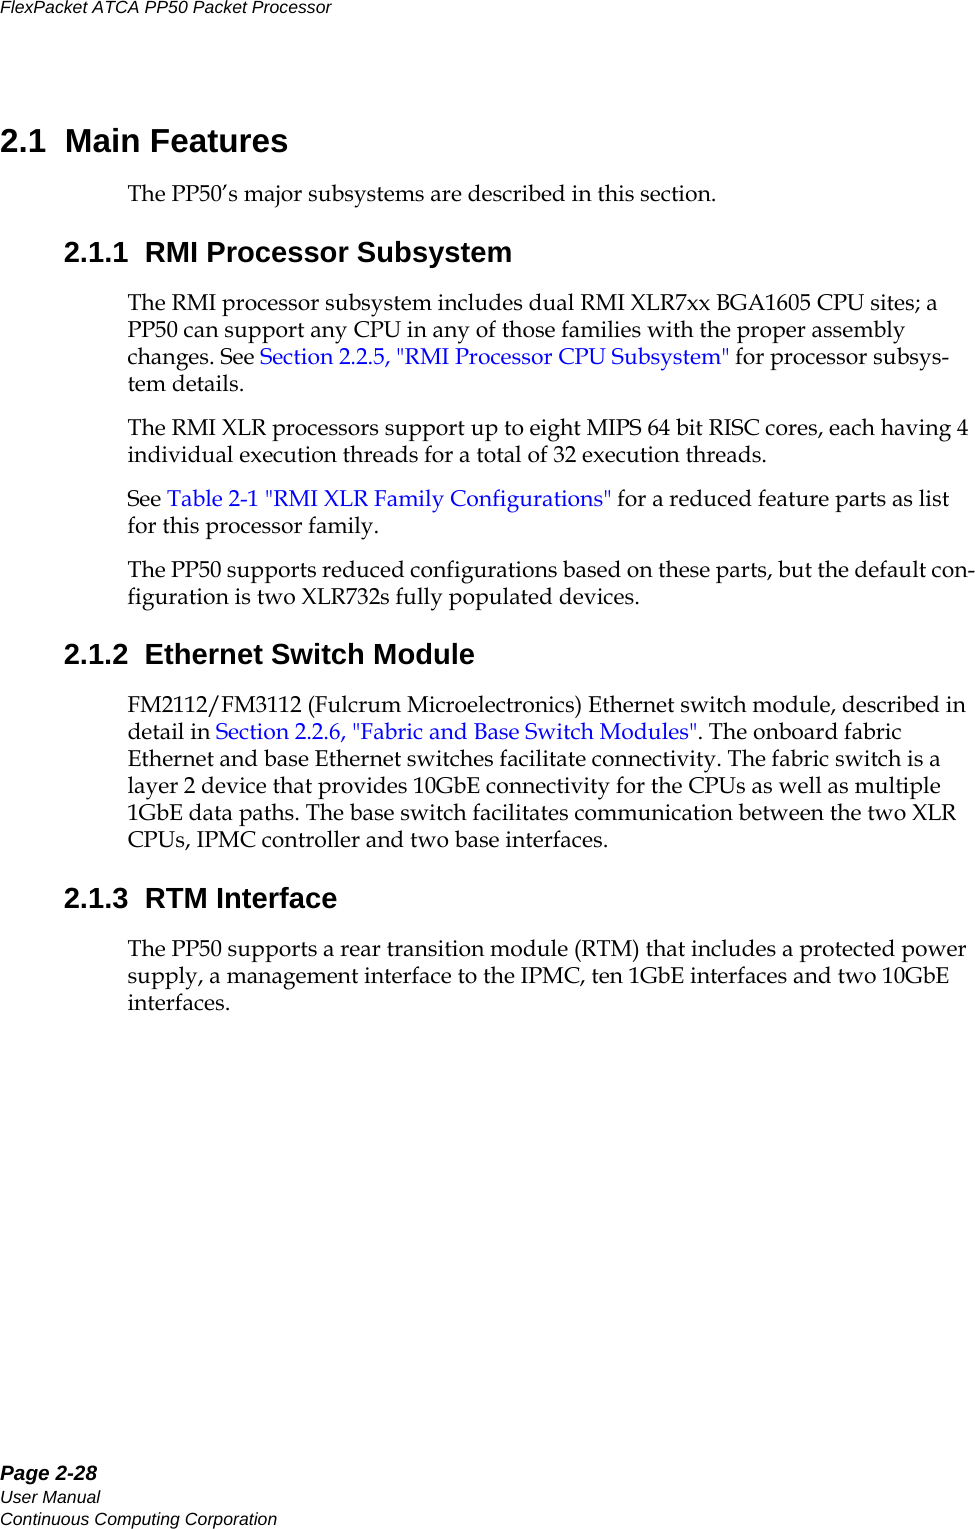 Page 2-28User ManualContinuous Computing CorporationFlexPacket ATCA PP50 Packet Processor     Preliminary2.1  Main FeaturesThe PP50’s major subsystems are described in this section.2.1.1  RMI Processor SubsystemThe RMI processor subsystem includes dual RMI XLR7xx BGA1605 CPU sites; a PP50 can support any CPU in any of those families with the proper assembly changes. See Section2.2.5, &quot;RMI Processor CPU Subsystem&quot; for processor subsys-tem details.The RMI XLR processors support up to eight MIPS 64 bit RISC cores, each having 4 individual execution threads for a total of 32 execution threads. See Table 2-1 &quot;RMI XLR Family Configurations&quot; for a reduced feature parts as list for this processor family. The PP50 supports reduced configurations based on these parts, but the default con-figuration is two XLR732s fully populated devices.2.1.2  Ethernet Switch ModuleFM2112/FM3112 (Fulcrum Microelectronics) Ethernet switch module, described in detail in Section2.2.6, &quot;Fabric and Base Switch Modules&quot;. The onboard fabric Ethernet and base Ethernet switches facilitate connectivity. The fabric switch is a layer 2 device that provides 10GbE connectivity for the CPUs as well as multiple 1GbE data paths. The base switch facilitates communication between the two XLR CPUs, IPMC controller and two base interfaces.2.1.3  RTM InterfaceThe PP50 supports a rear transition module (RTM) that includes a protected power supply, a management interface to the IPMC, ten 1GbE interfaces and two 10GbE interfaces.